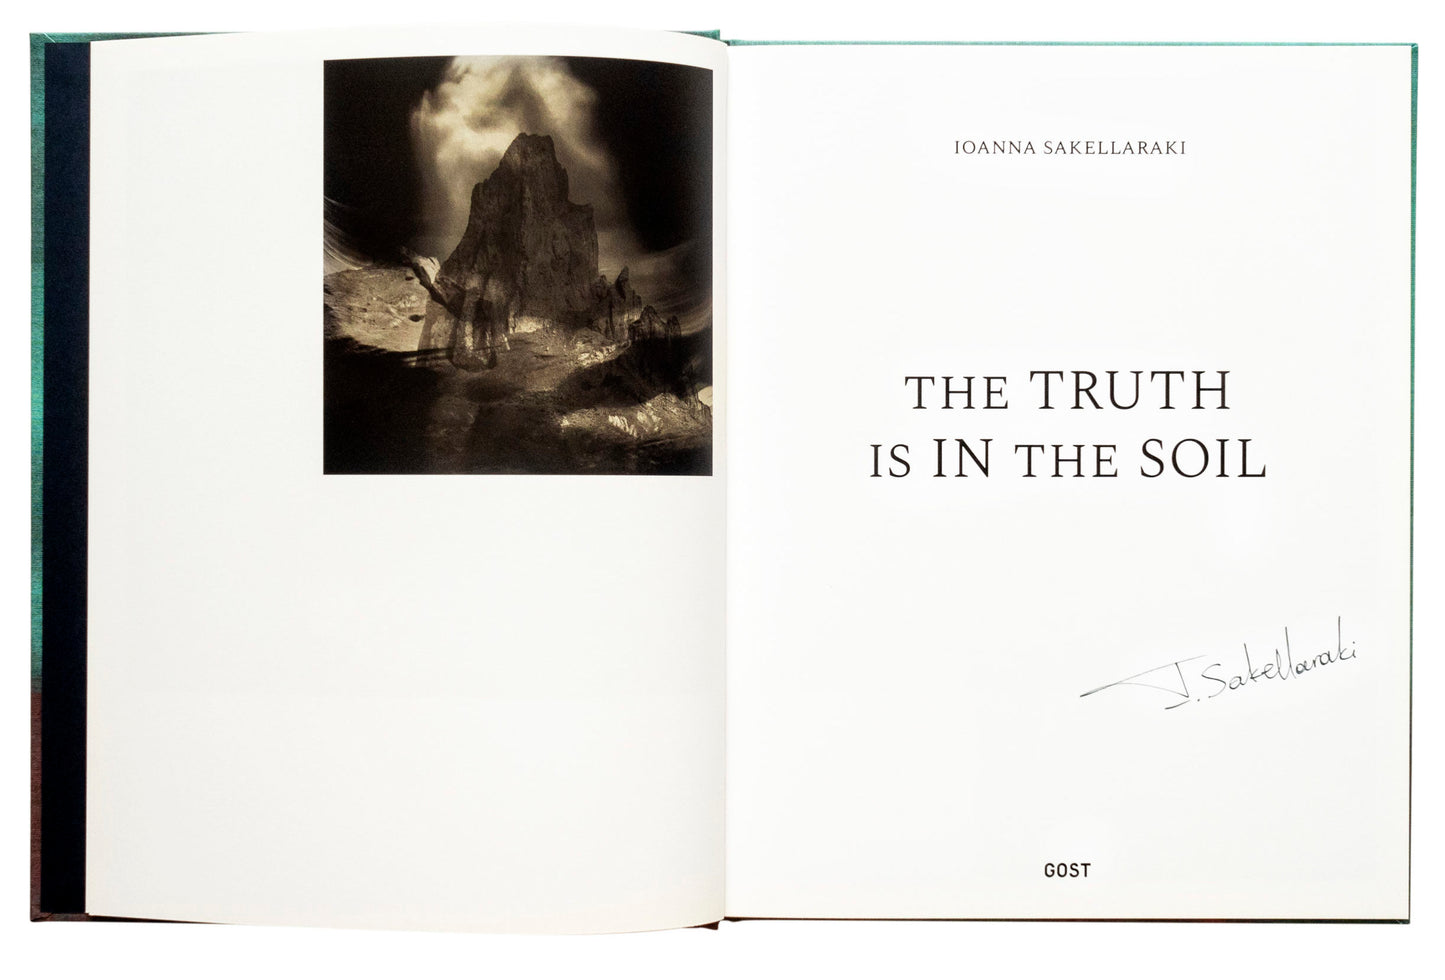 The Truth is in the Soil - Signed